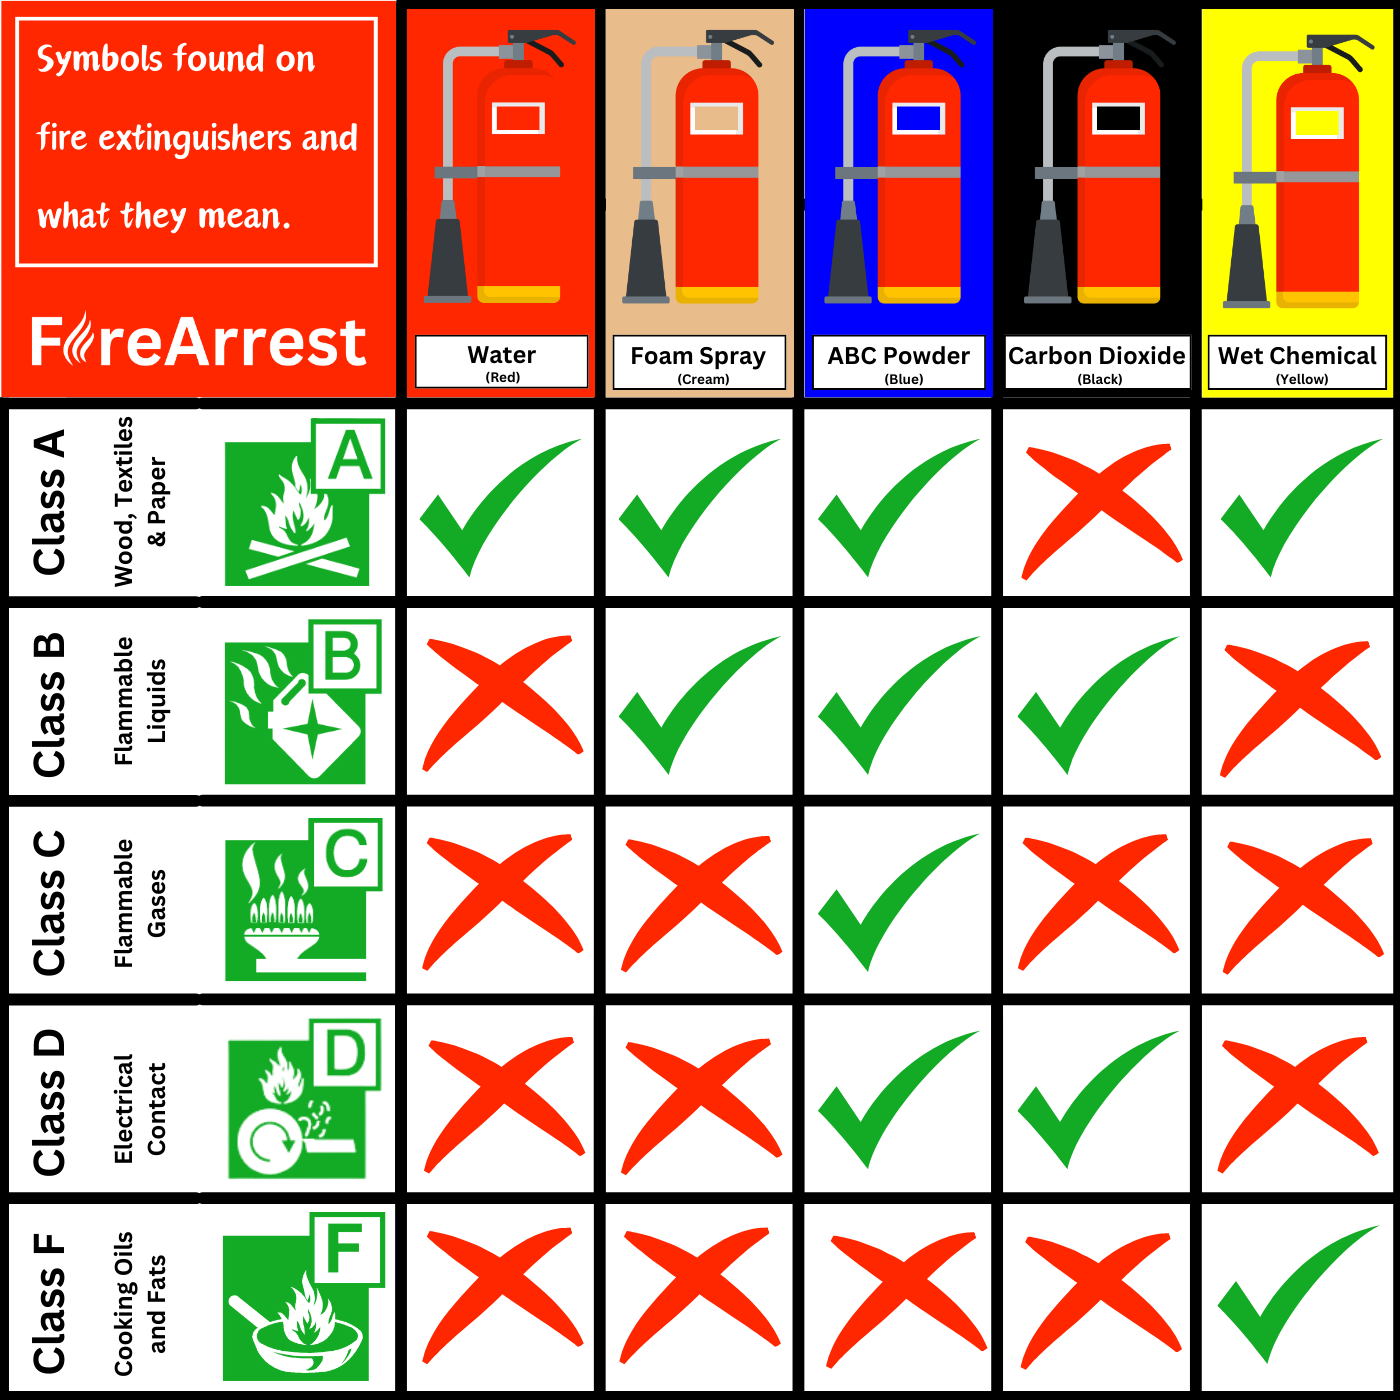 Symbols Found On Fire Extinguishers and What They Mean